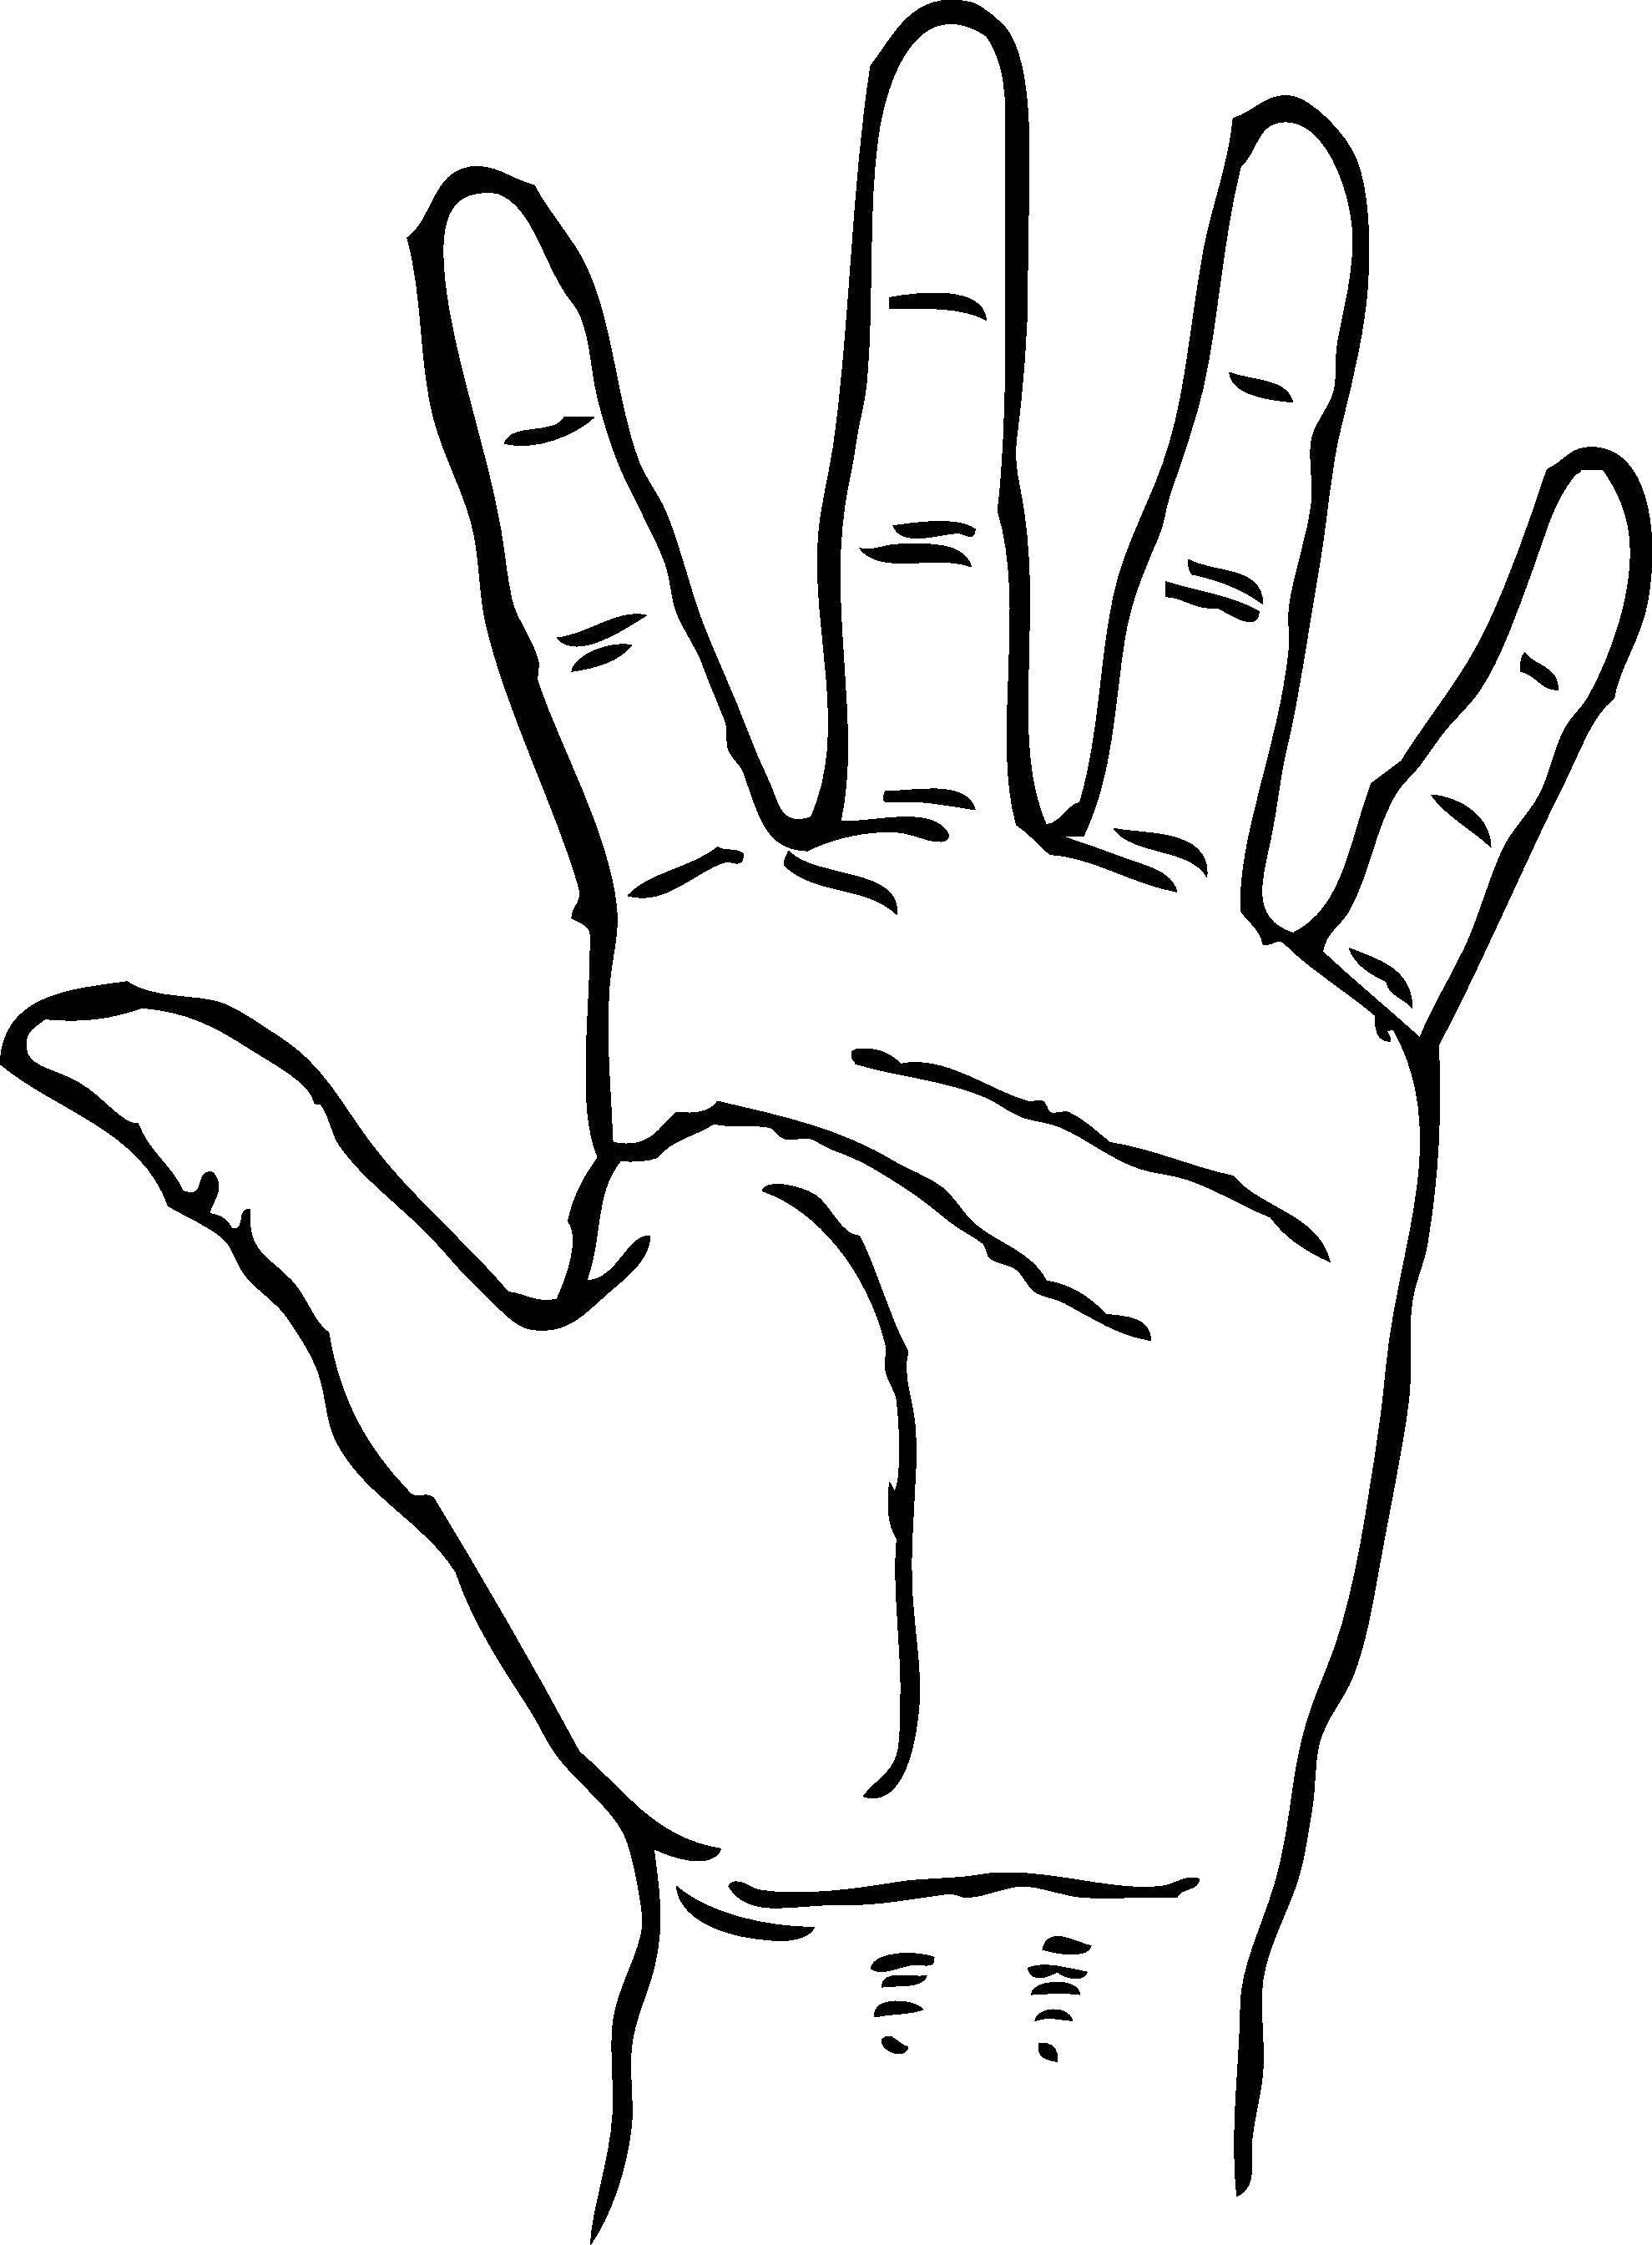 Coloring The hand of man. Category hand. Tags:  hands, hands.